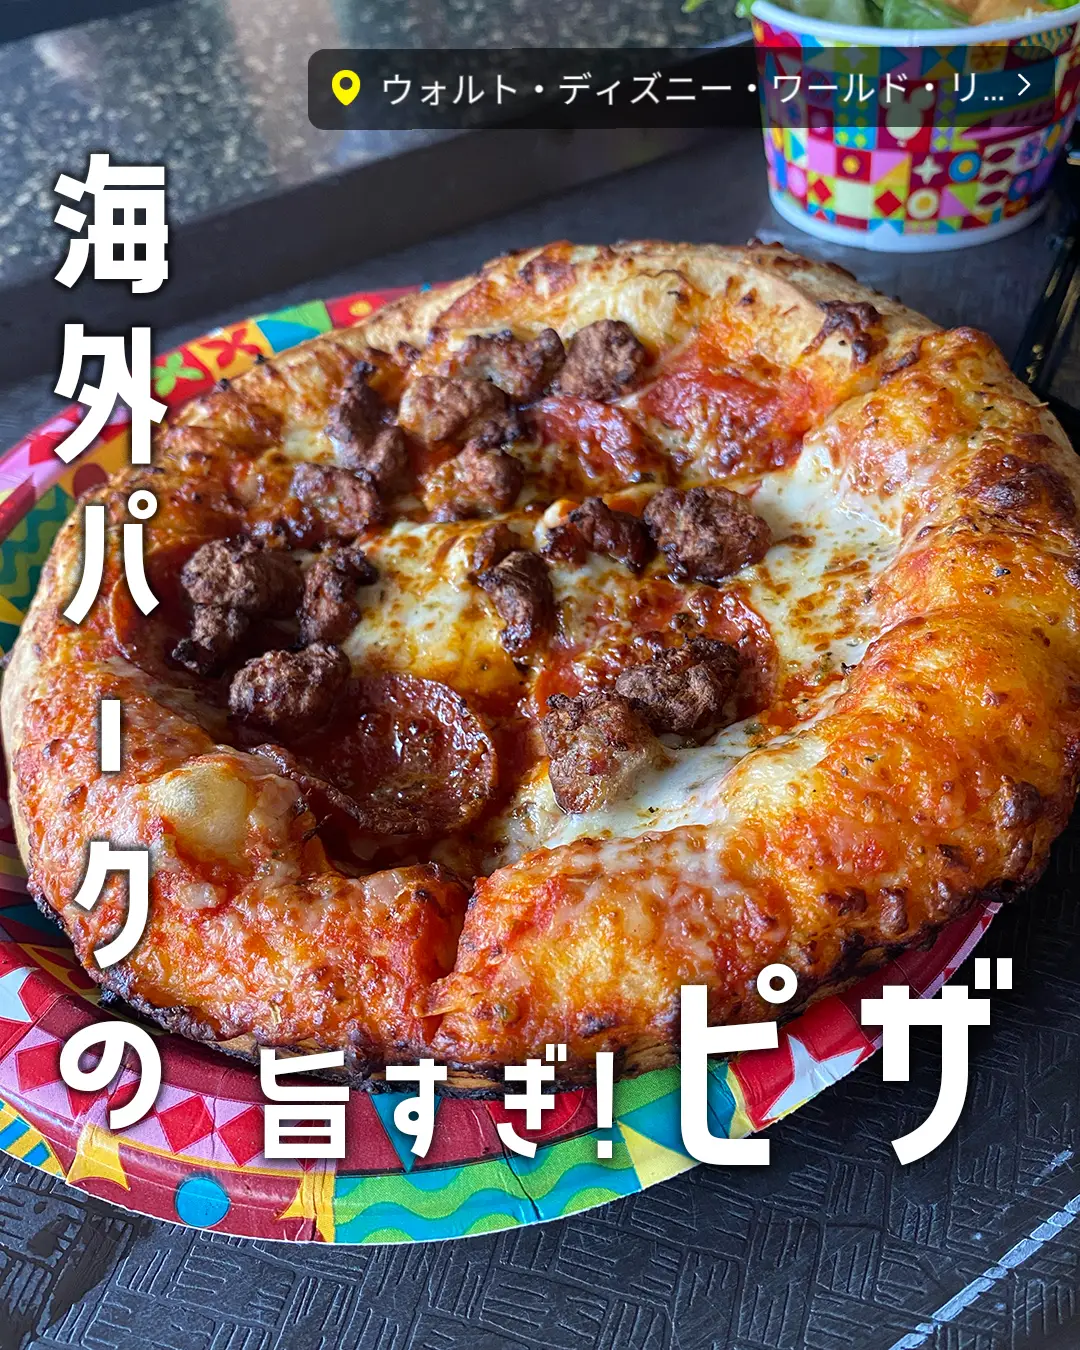 Quick and Easy Pizzas and Pasta\nピザ パスタ パ